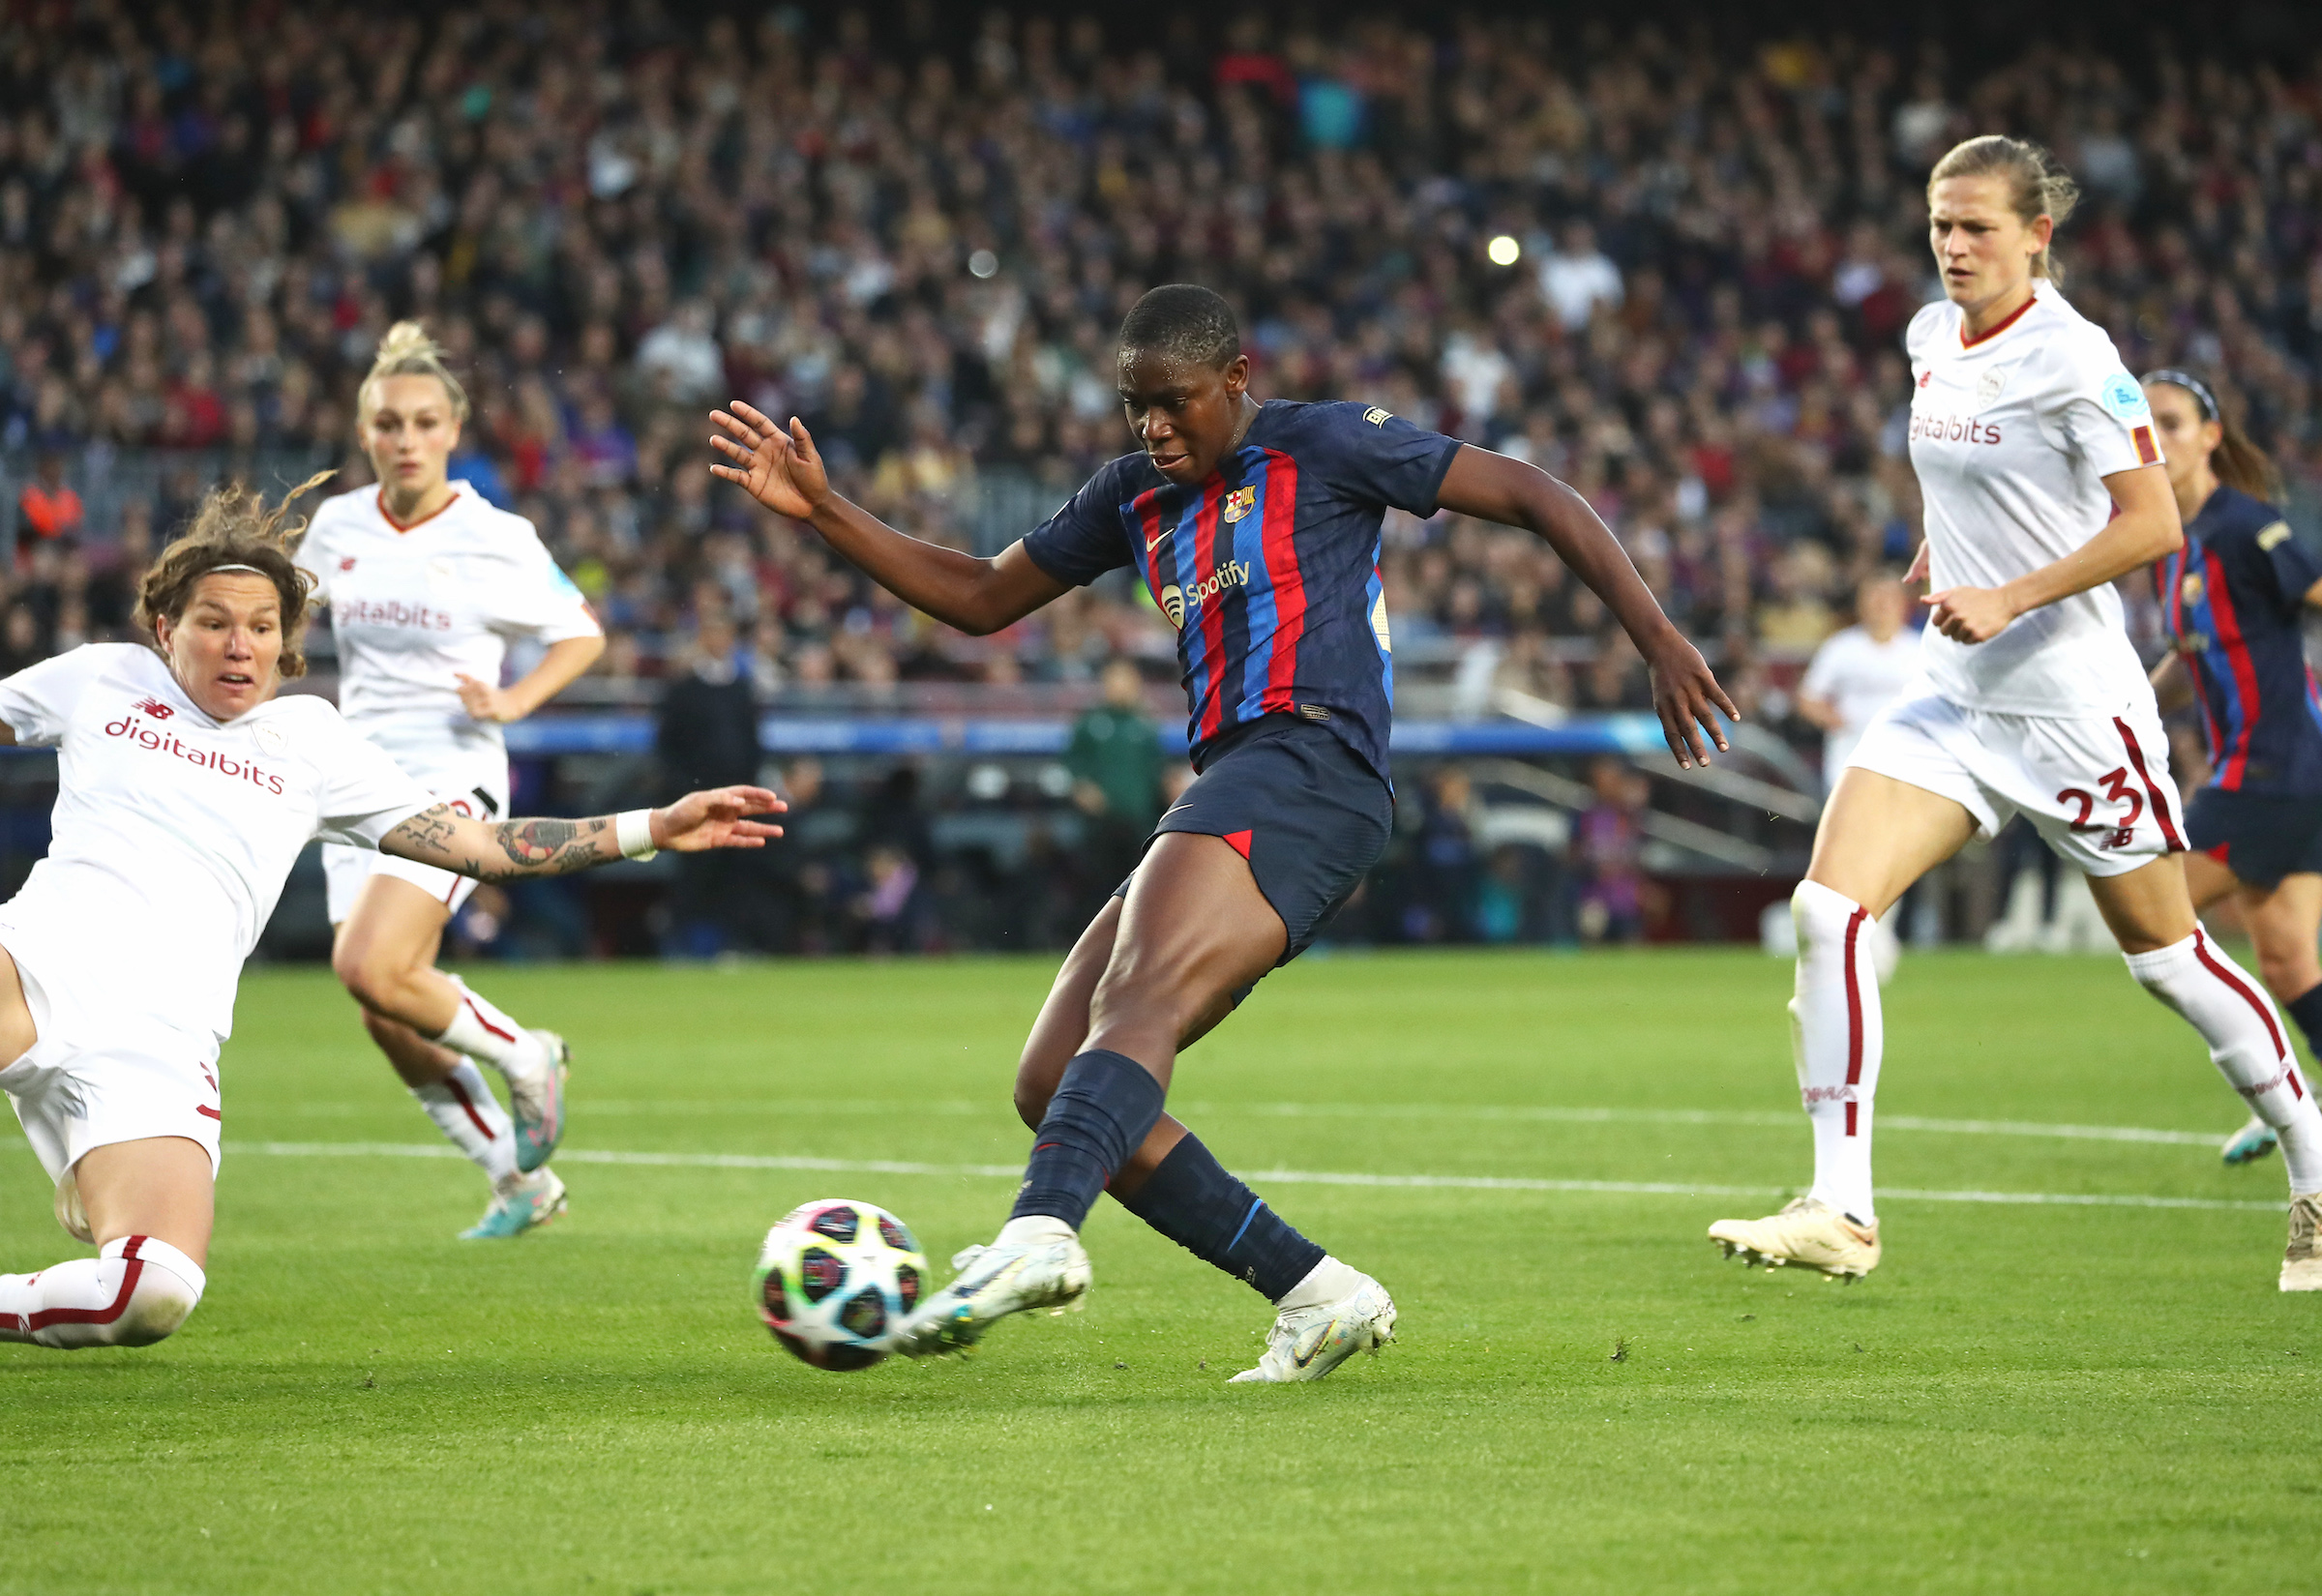 Asisat Oshoala during the match between FC Barcelona and AS Roma, corresponding to the 2nd leg of the quarter finals of the UEFA Womens Champions League, played at the Spotify Csmp Nou Stadium, on 29th March 2023, in Barcelona, Spain. (Joan Valls—Urbanandsport/NurPhoto/Getty Images)